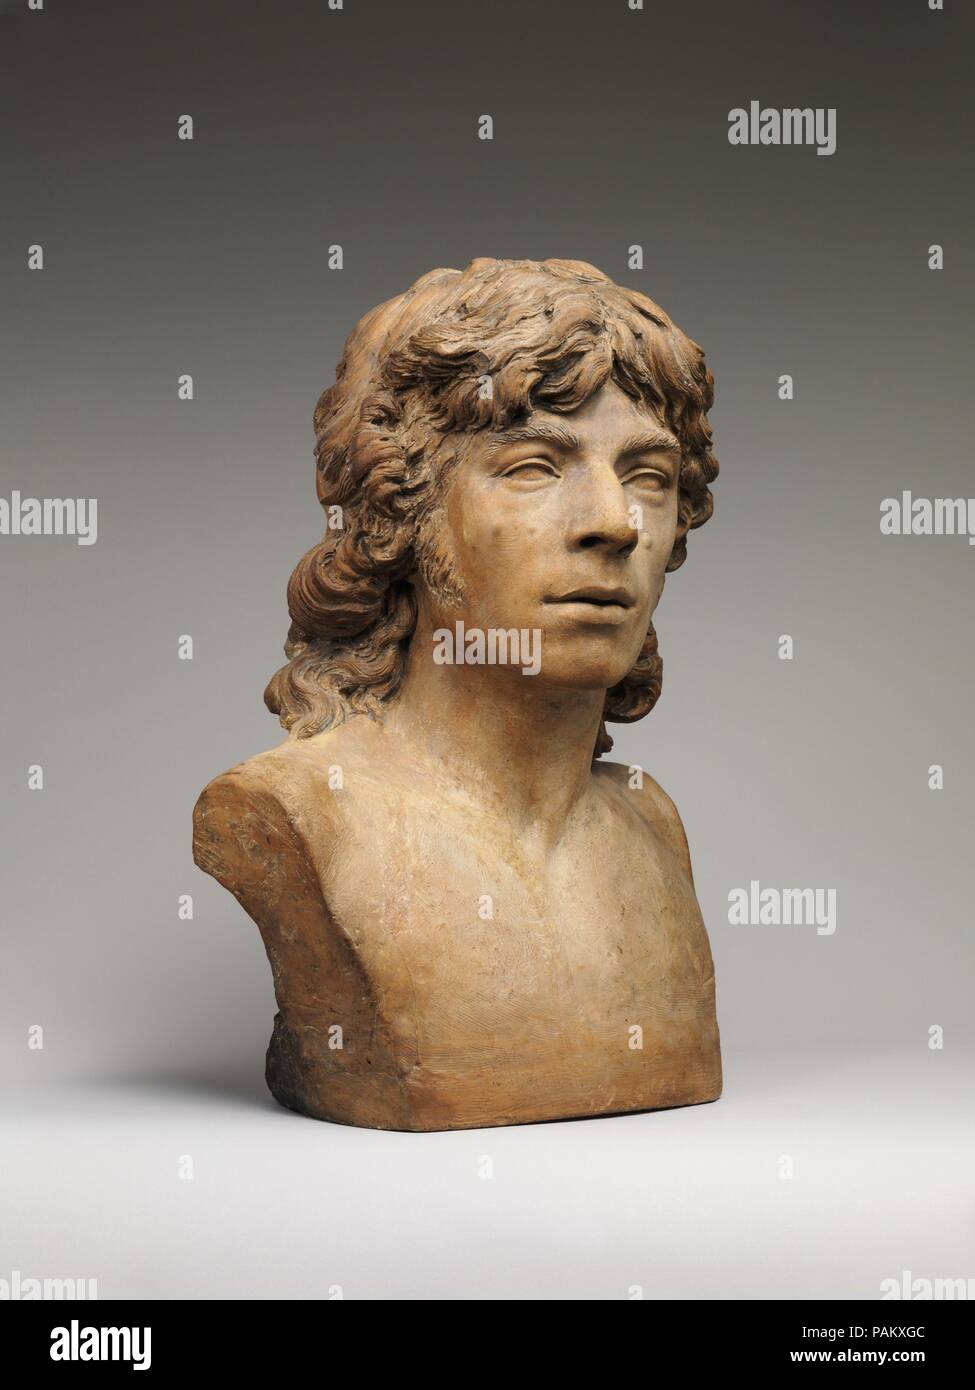 Bust of a man. Artist: Joseph Chinard (French, Lyon 1756-1813 Lyon). Culture: French, Lyon. Dimensions: Overall (confirmed): 17 1/4 × 11 1/2 × 9 1/2 in. (43.8 × 29.2 × 24.1 cm). Date: ca. 1790-95.  This bust, initially acquired as a portrait of the radical pamphleteer, Jacques-René Hébert, nicknamed Père Duchesne, is now believed to depict an unidentified young revolutionary. The informality of the tousled hair contrasts with the classically inspired herm cut of the bust. Museum: Metropolitan Museum of Art, New York, USA. Stock Photo